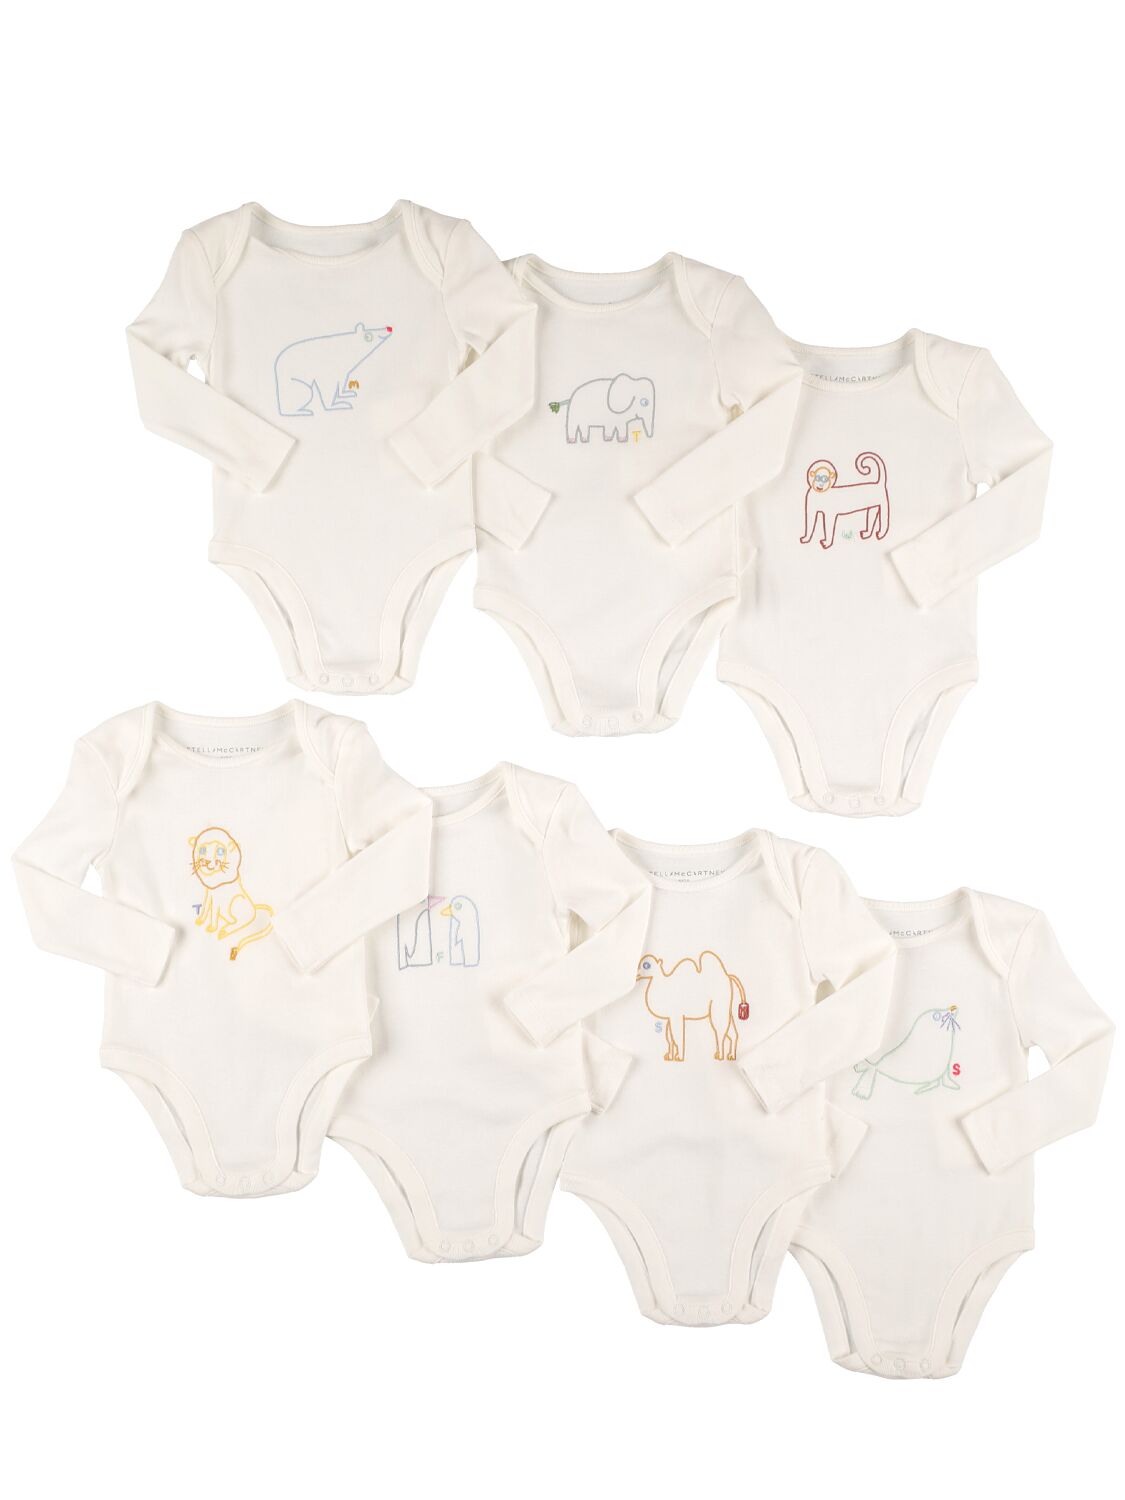 Image of Set Of 7 Printed Cotton Jersey Bodysuits